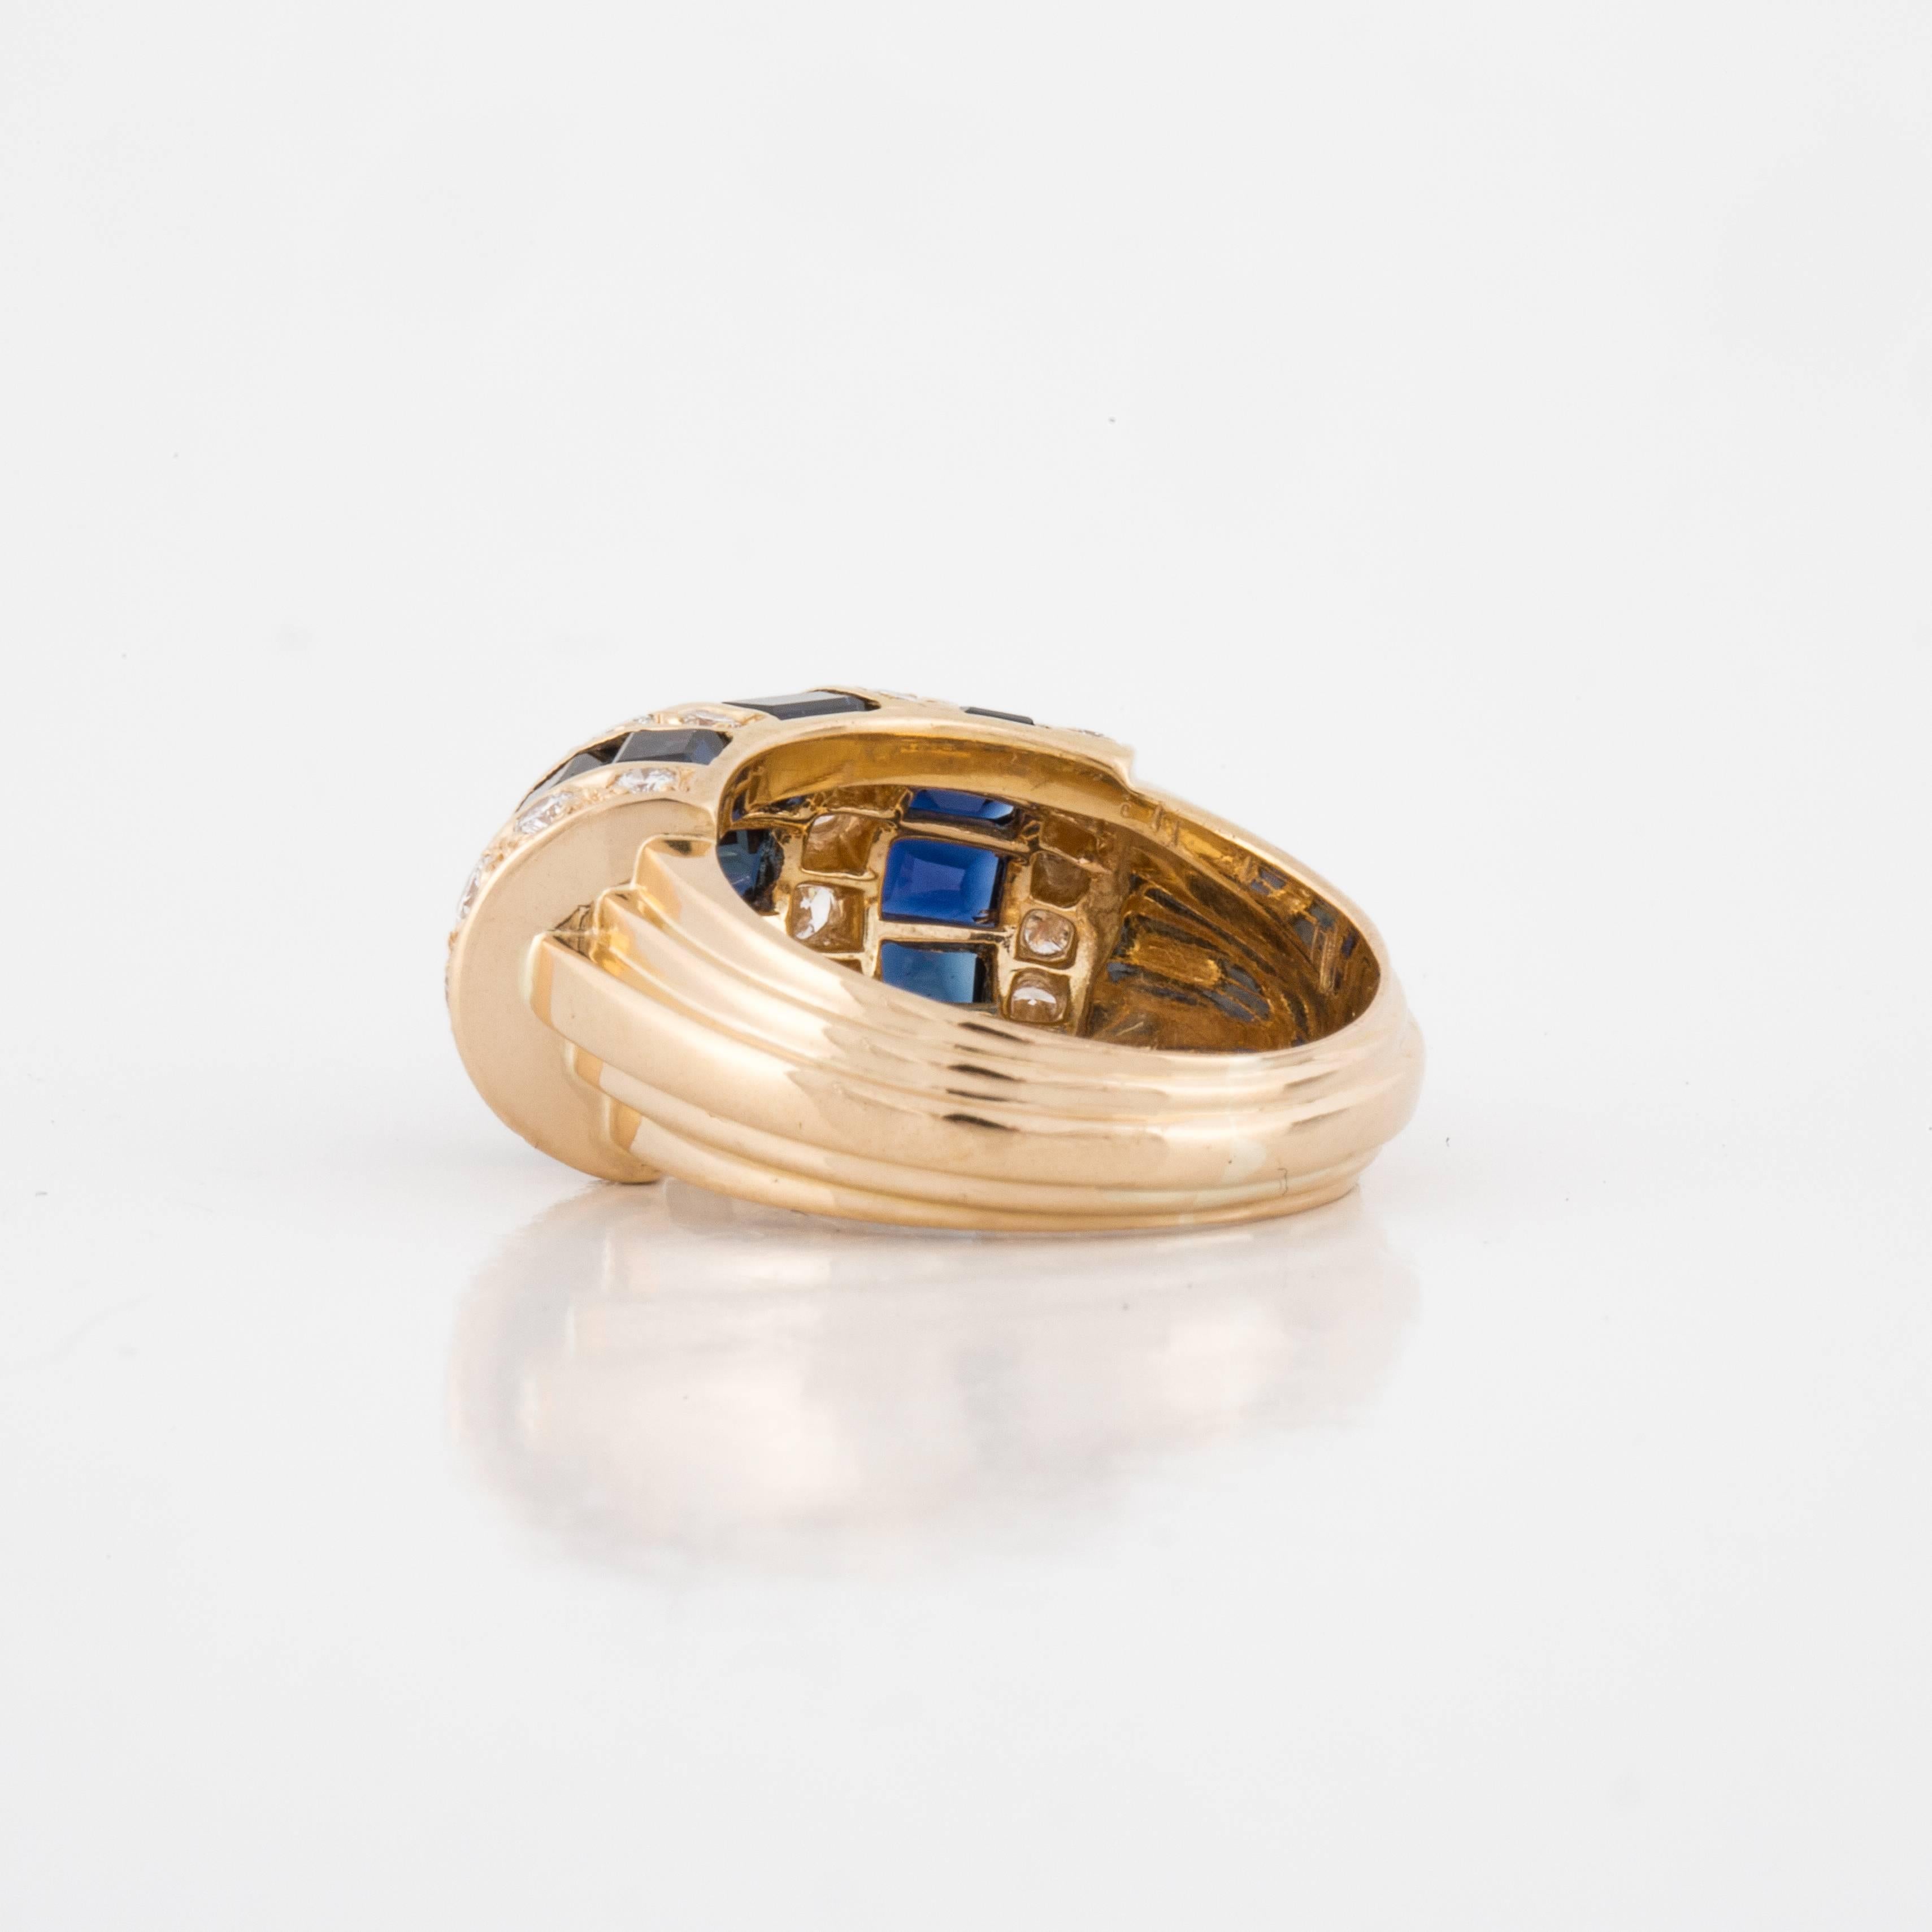 Mixed Cut Oscar Heyman Bros. Sapphire and Diamond Ring in 18K Gold For Sale